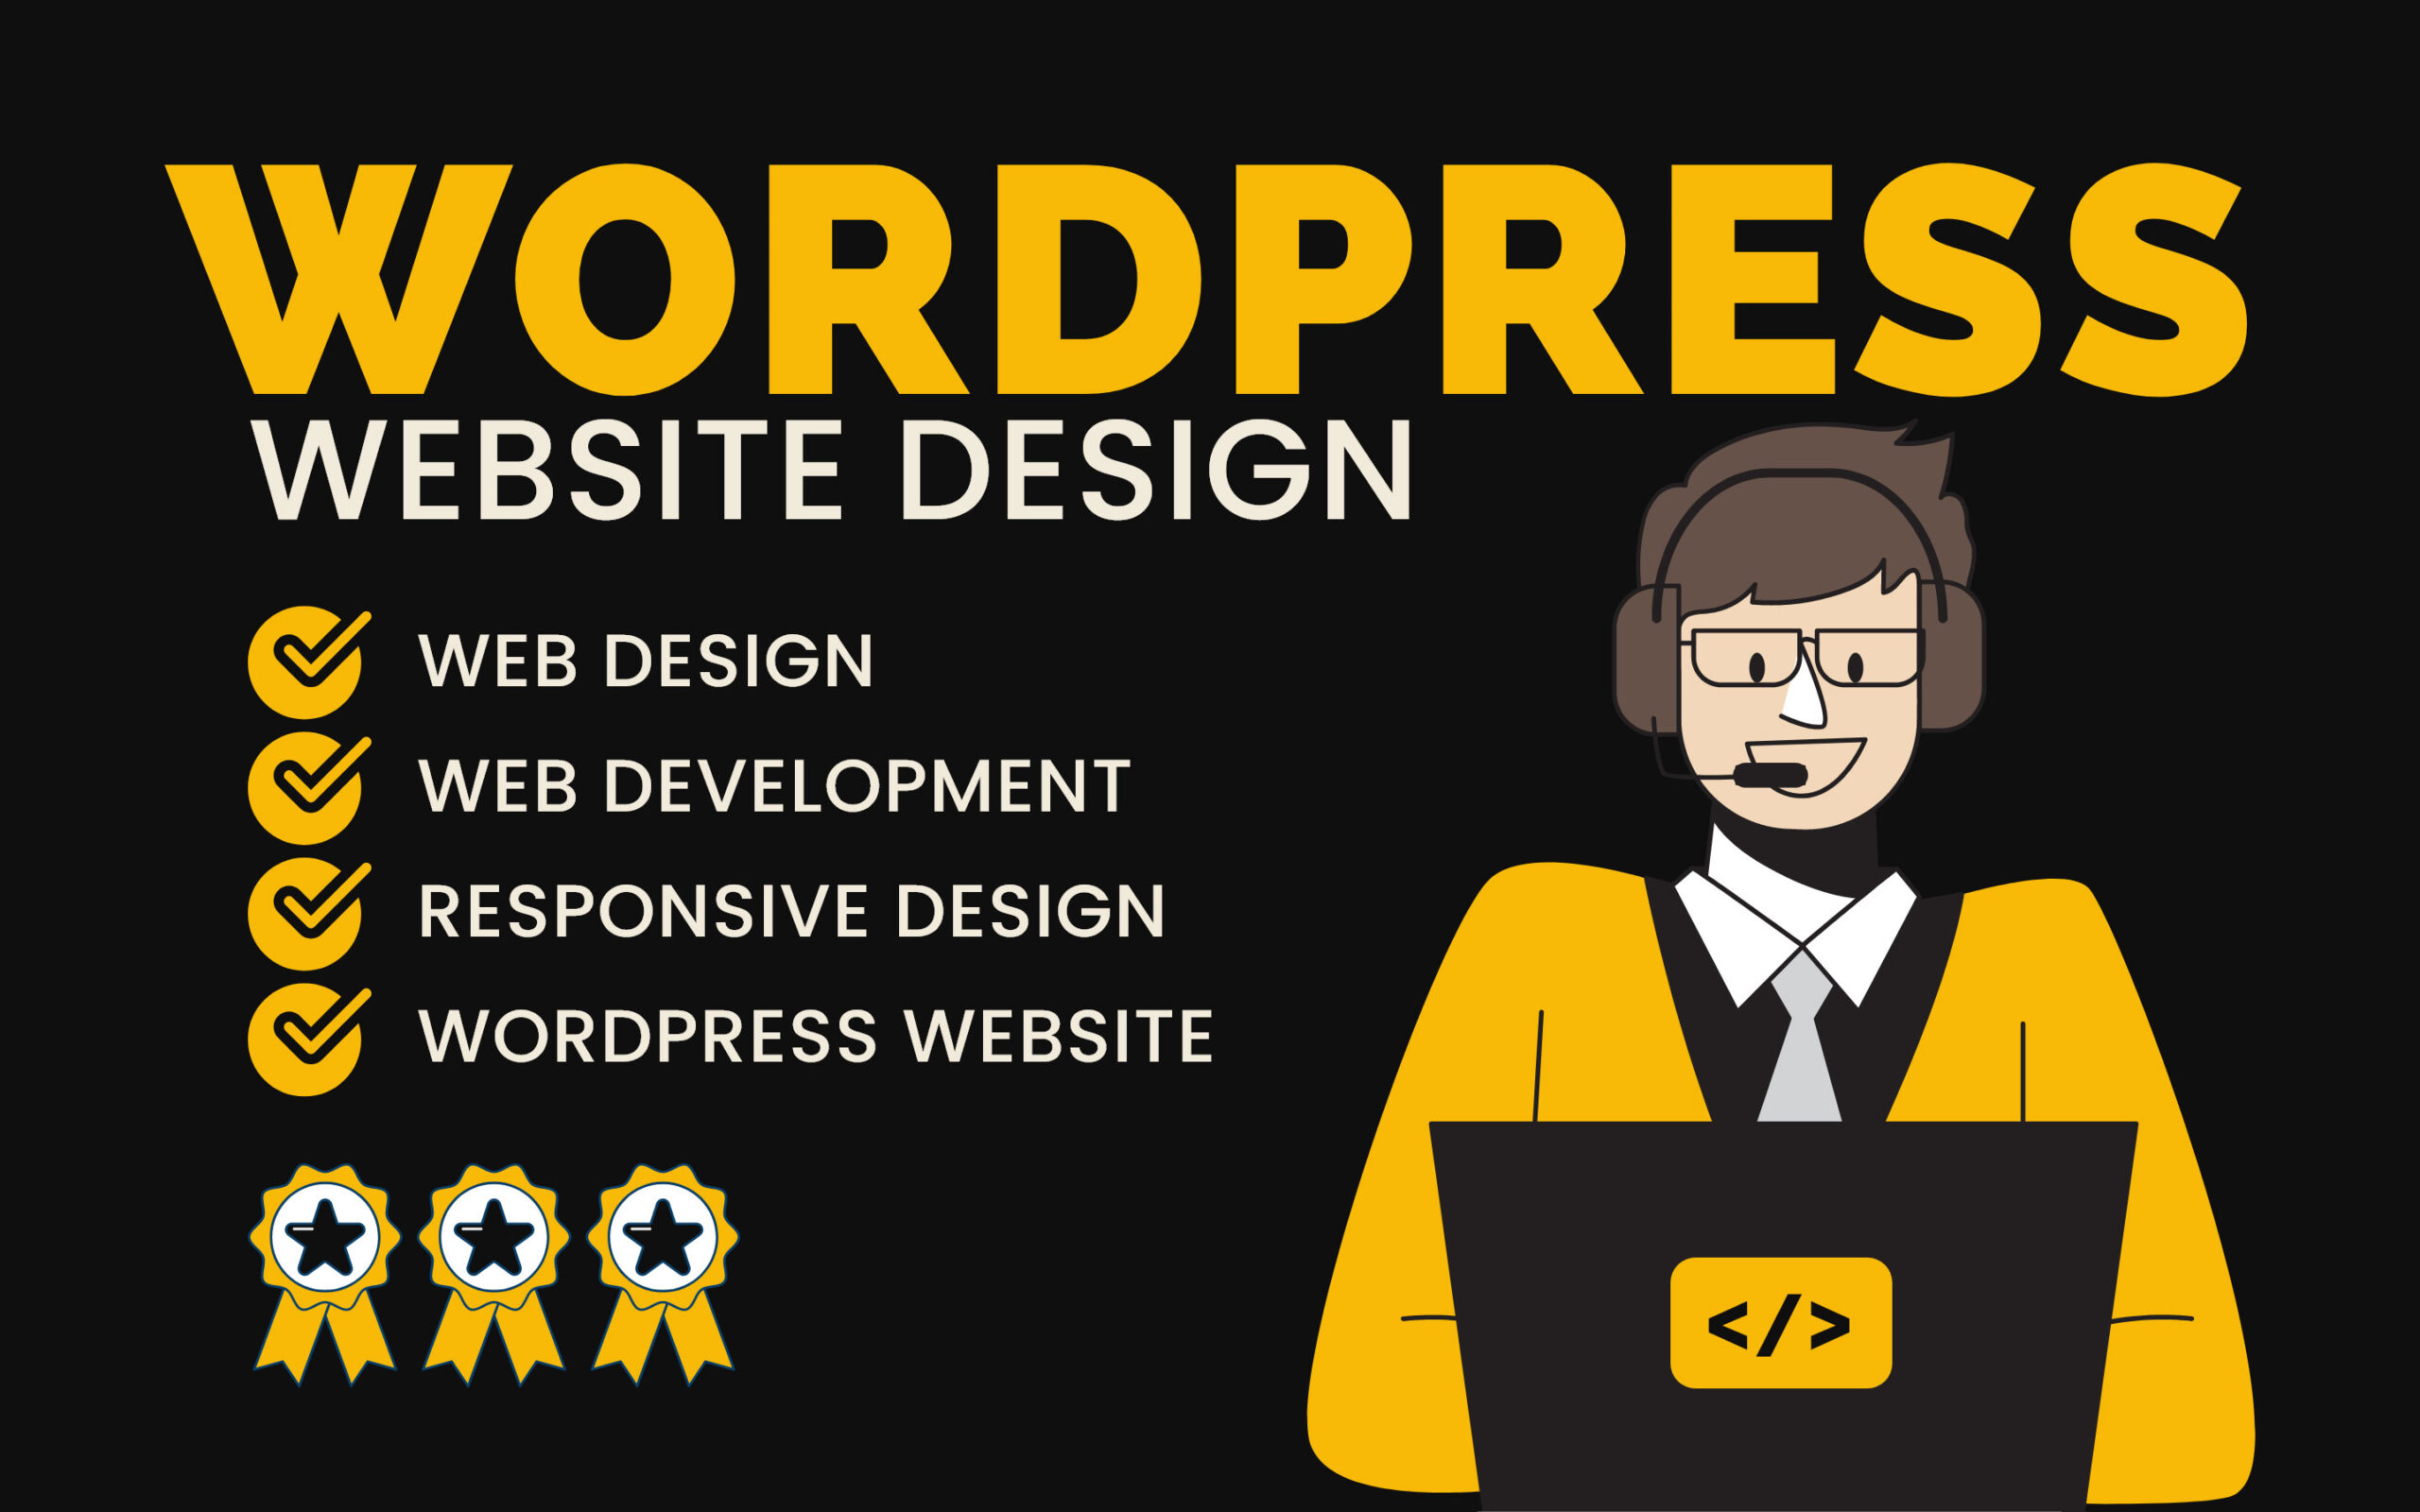 16093i will design you a wordpress website for your business